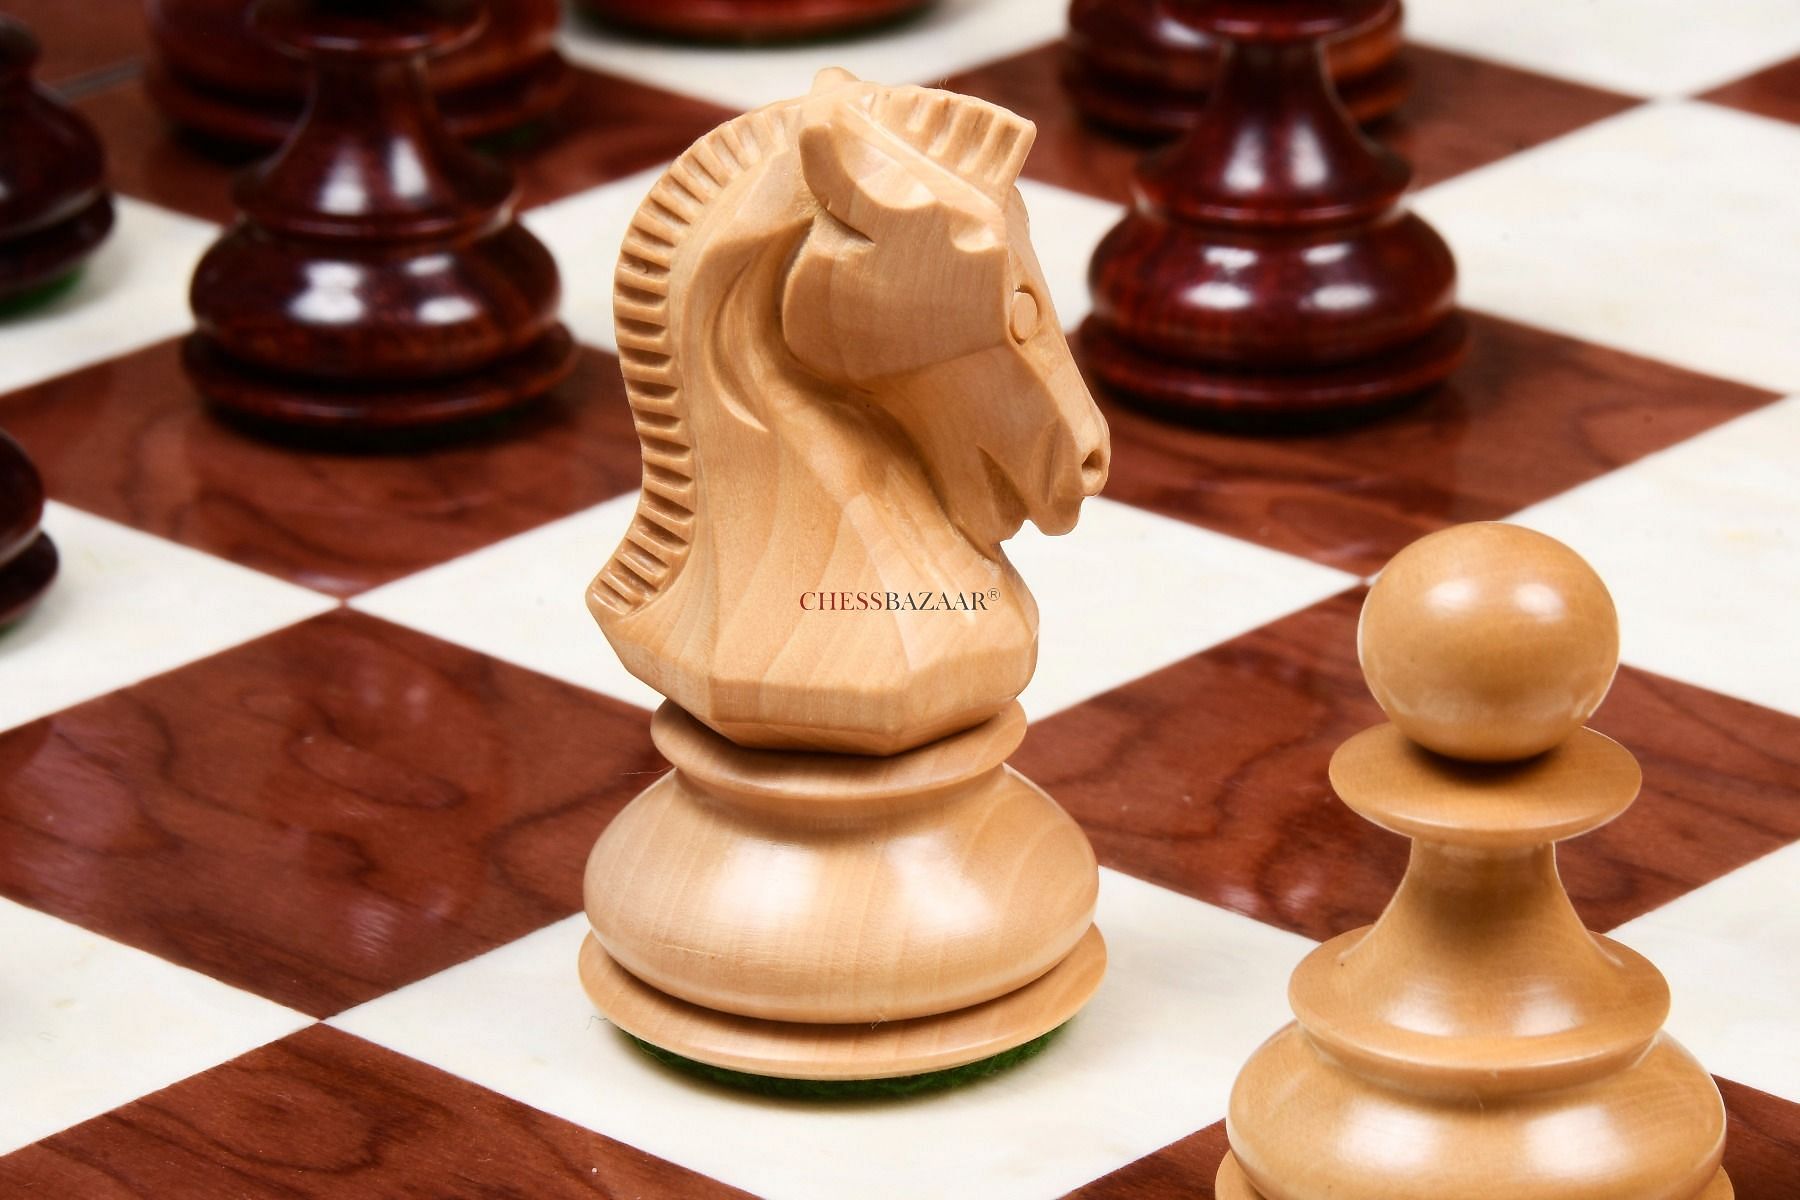 Light color knight of Bobby Fischer favorite chess series